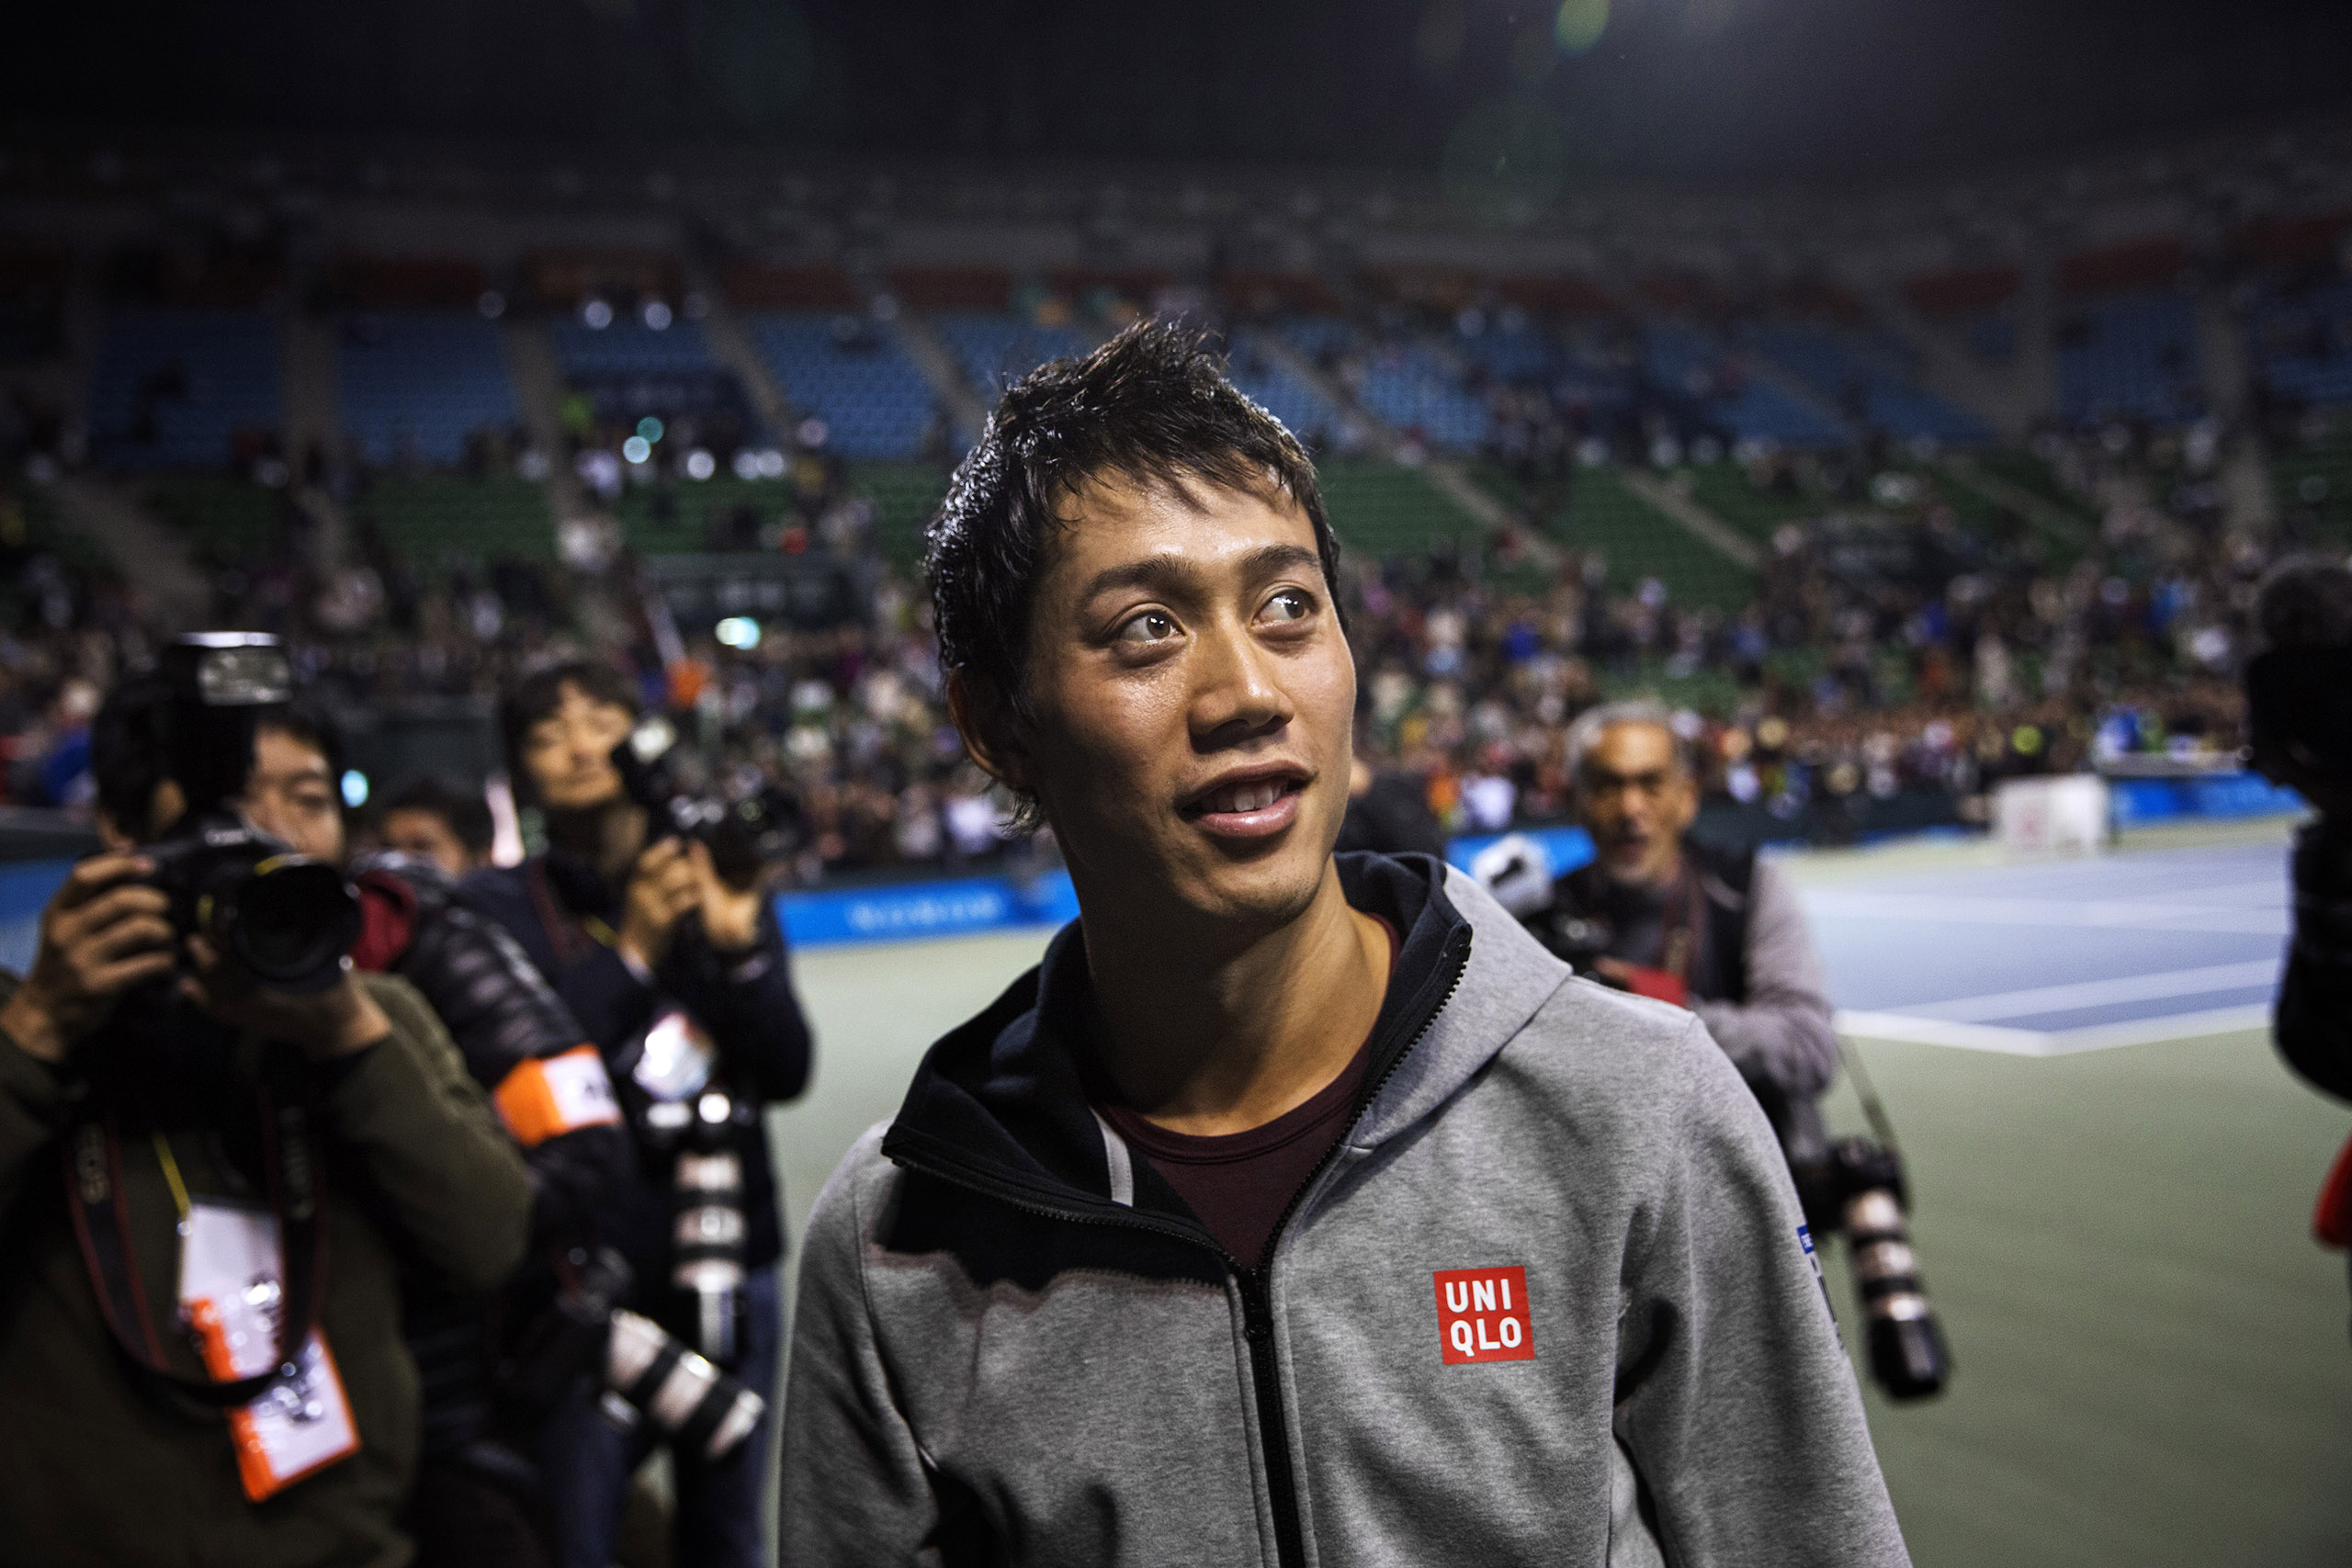 Nishikori, who reached the final of the U.S. Open in 2014, is now the No. 5–ranked tennis player in the world (Adam Dean—Panos for TIME)